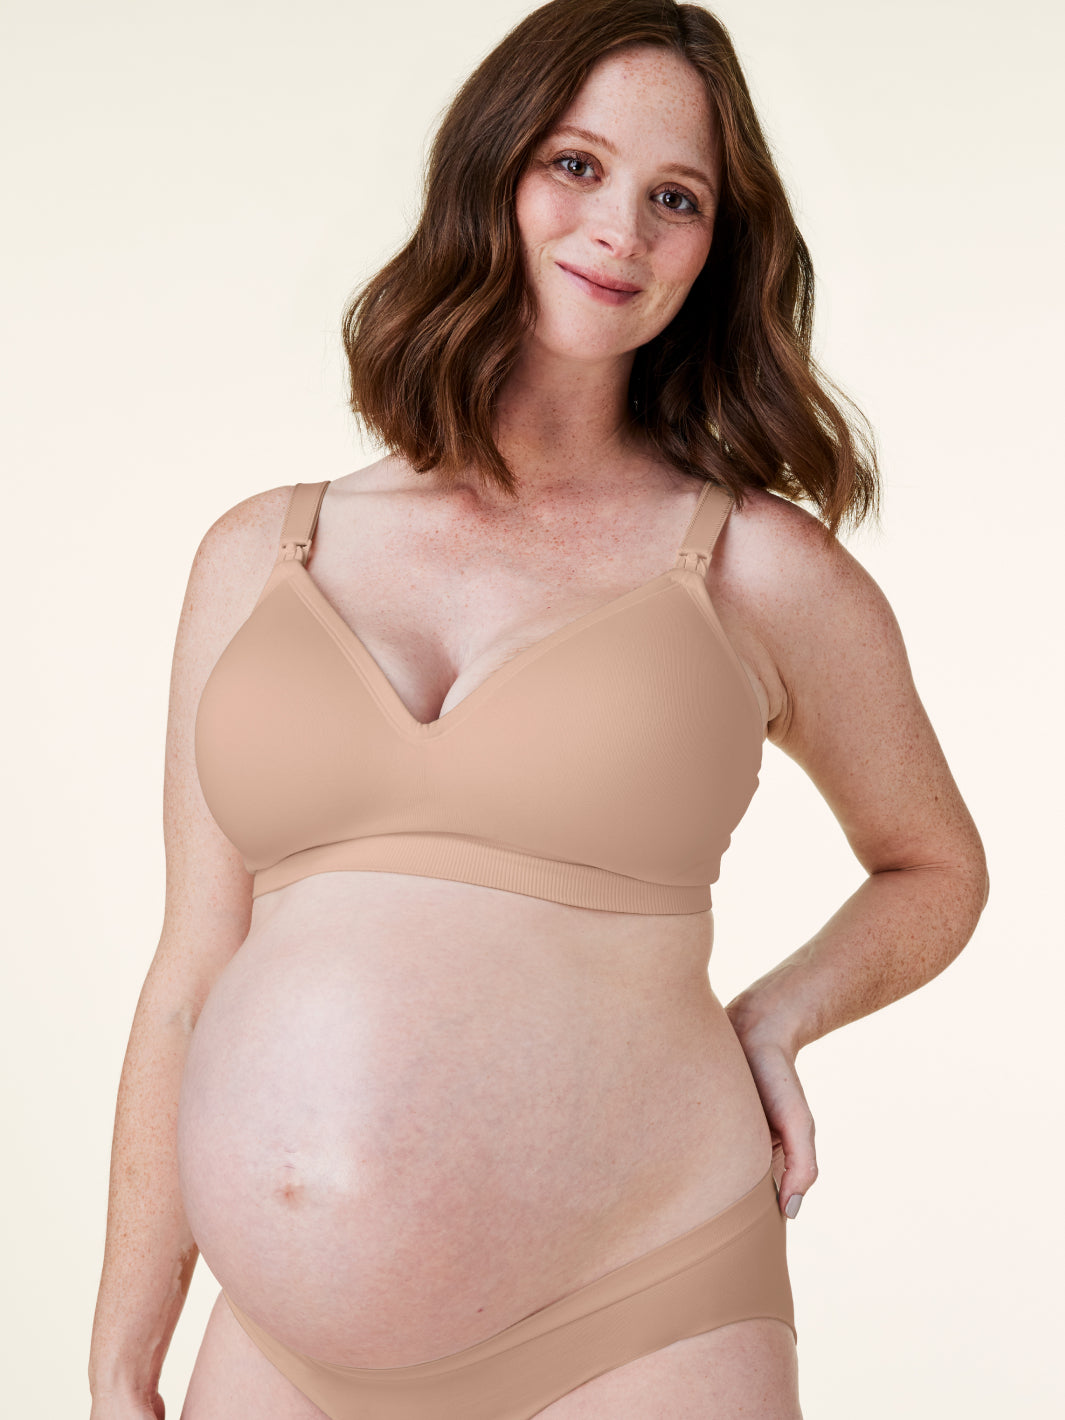  ZYLDDP Nursing Bra Women's Full Cup Lightly Lined Plunge  Underwire Maternity Postpartum Bra， Comfortable Soft Sleep Bra (Color :  Apricot, Size : 34G) : Clothing, Shoes & Jewelry